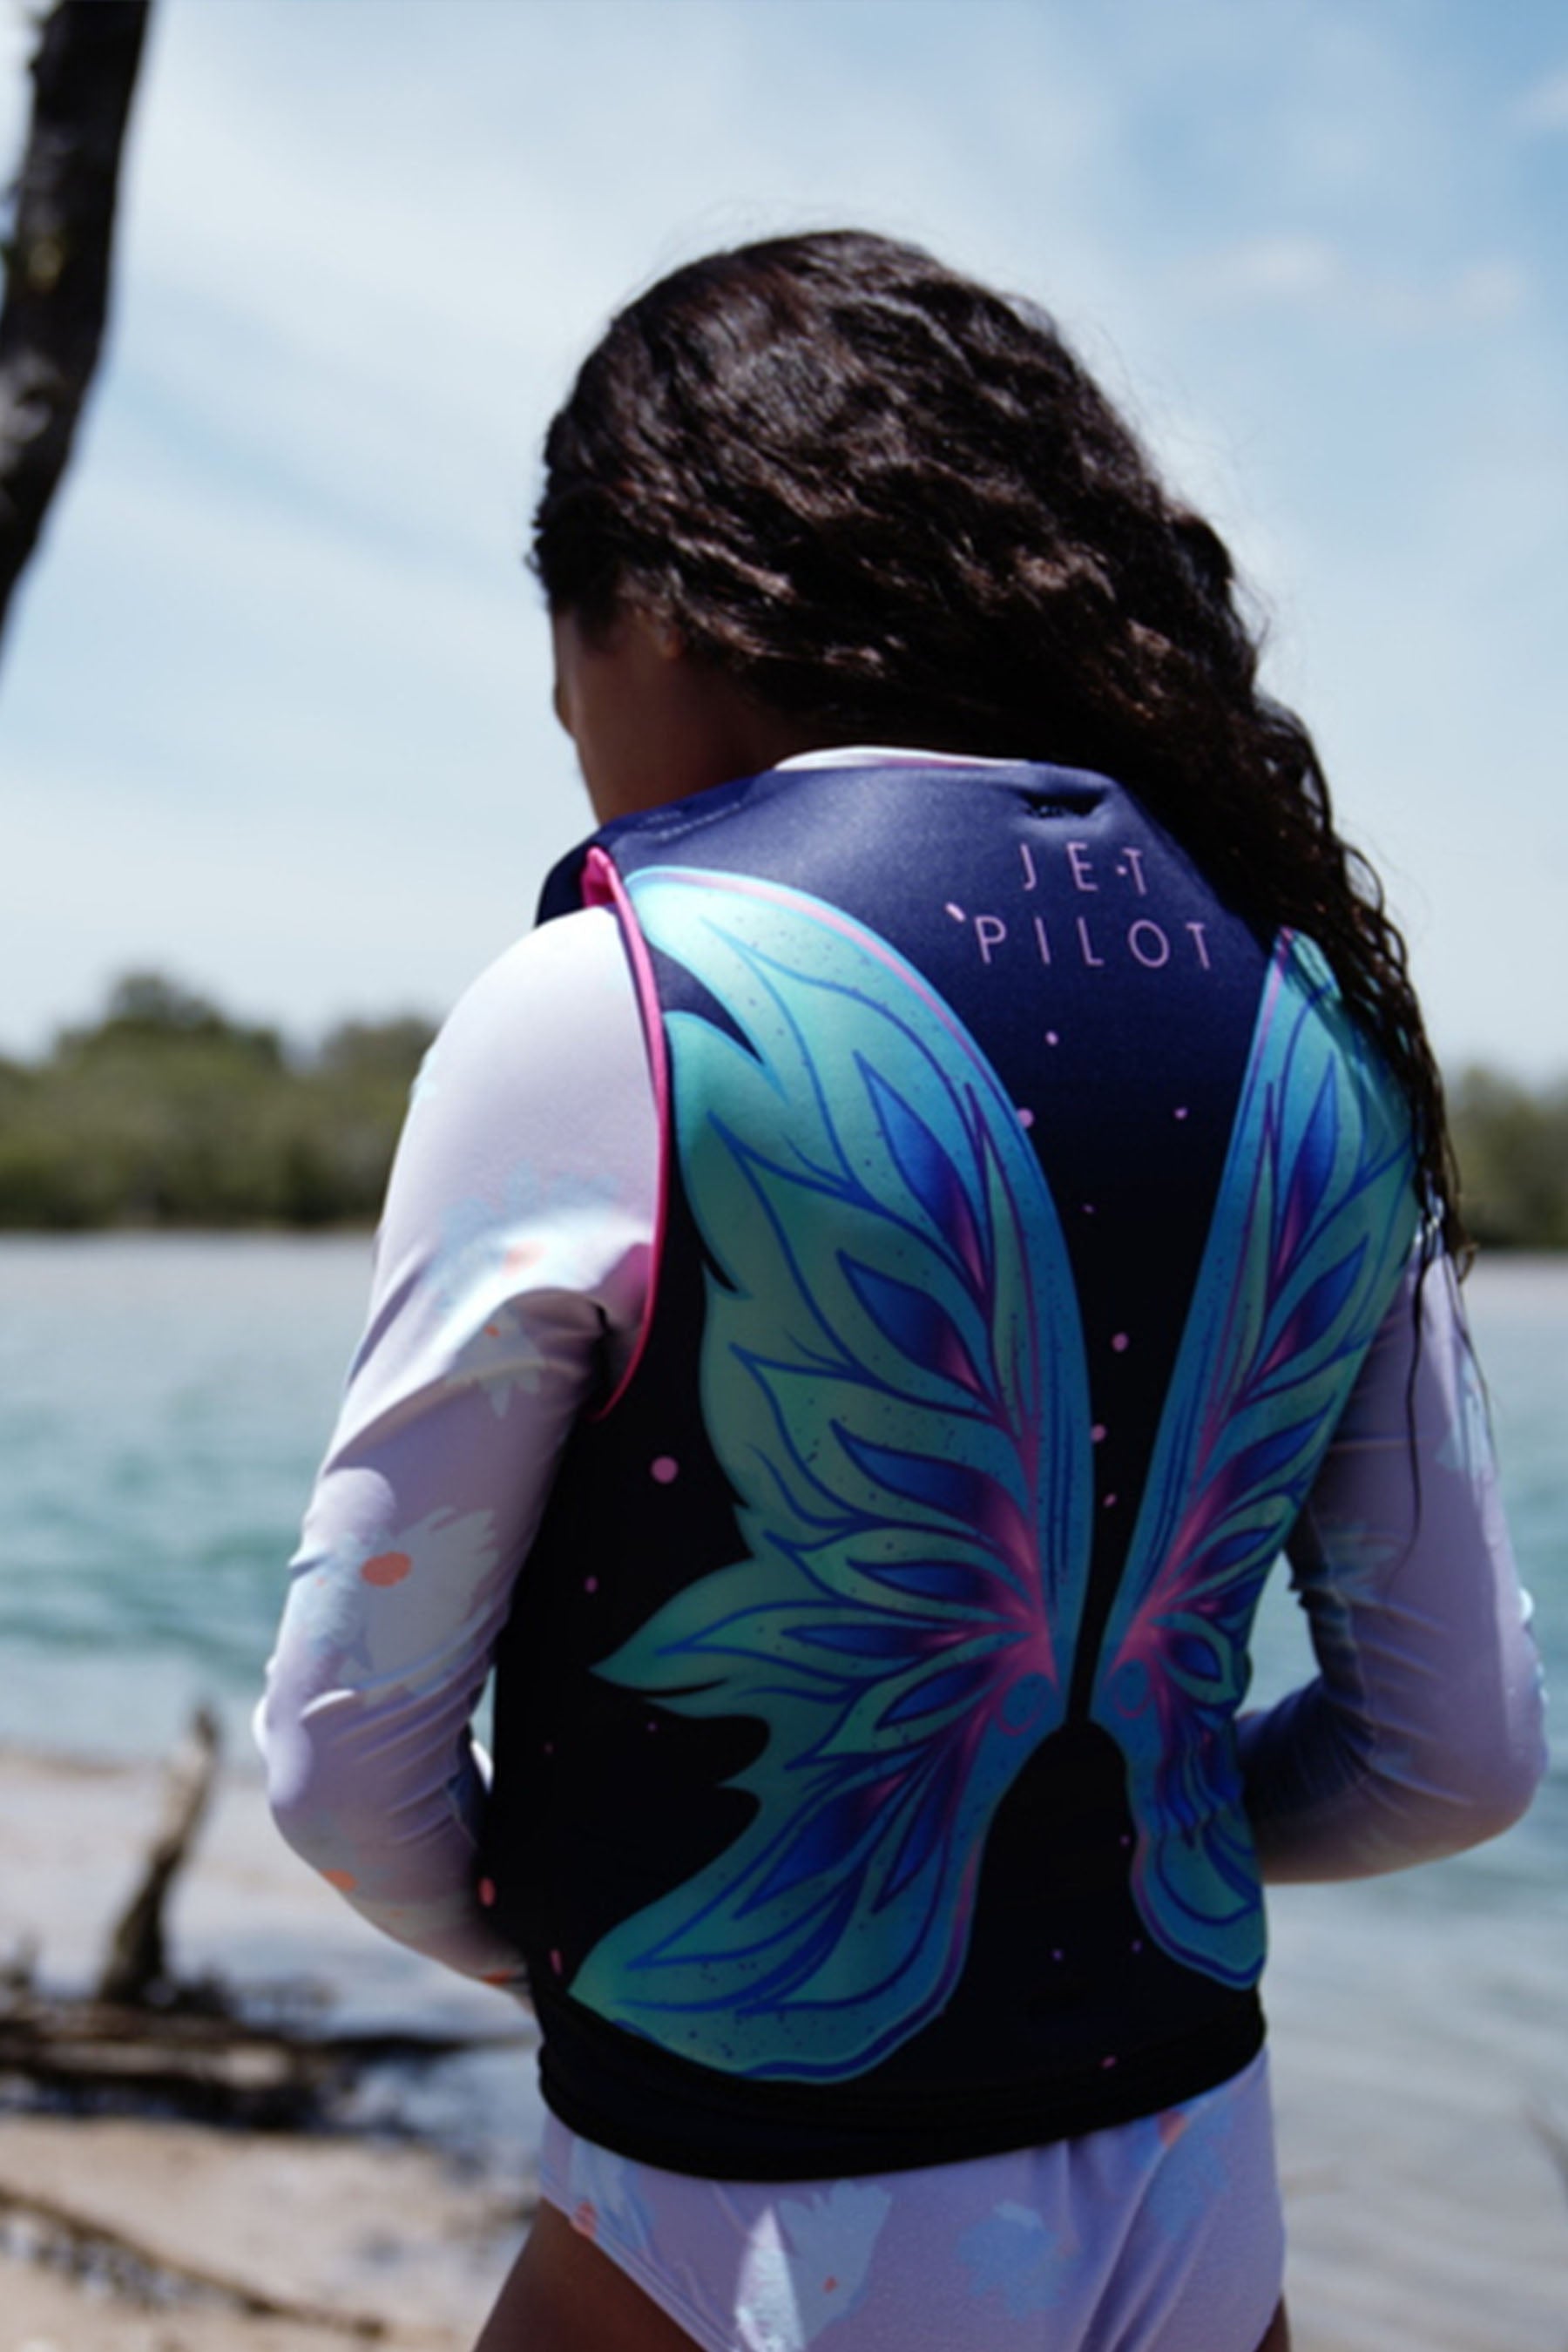 Jetpilot Wings Youth Cause Neo Life Jacket - Navy